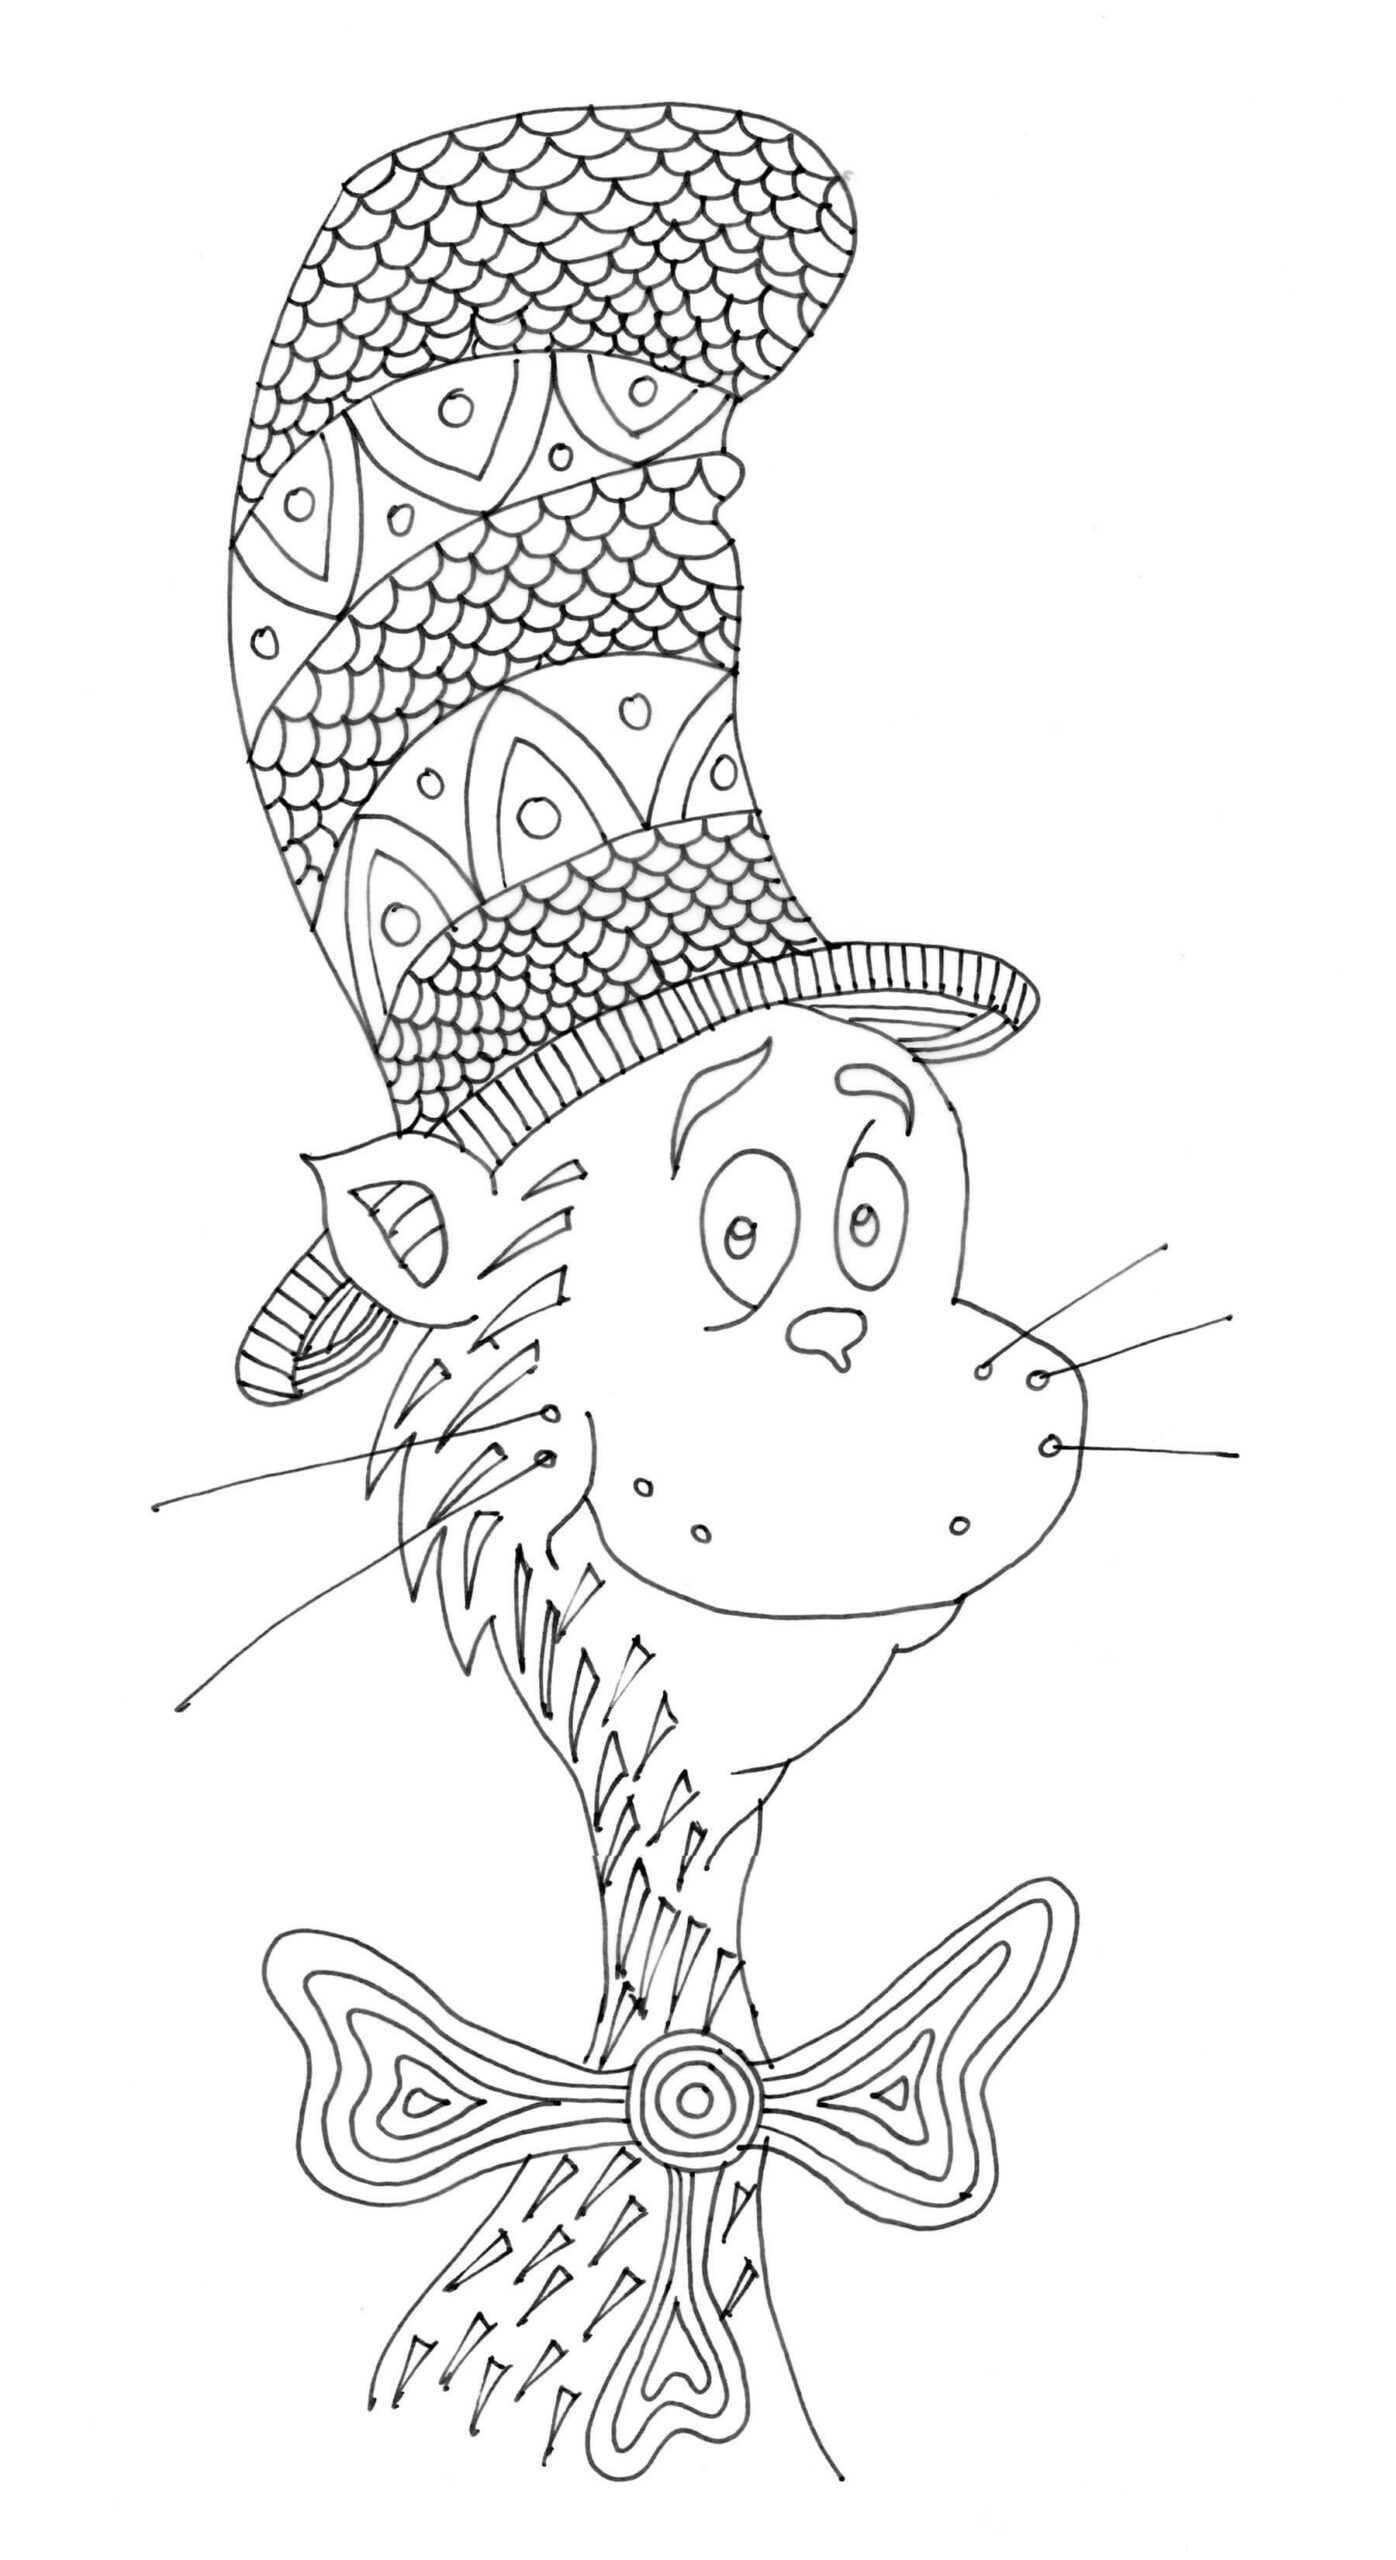 A Beautiful Hat With Prints On The Cat coloring page - Download, Print ...